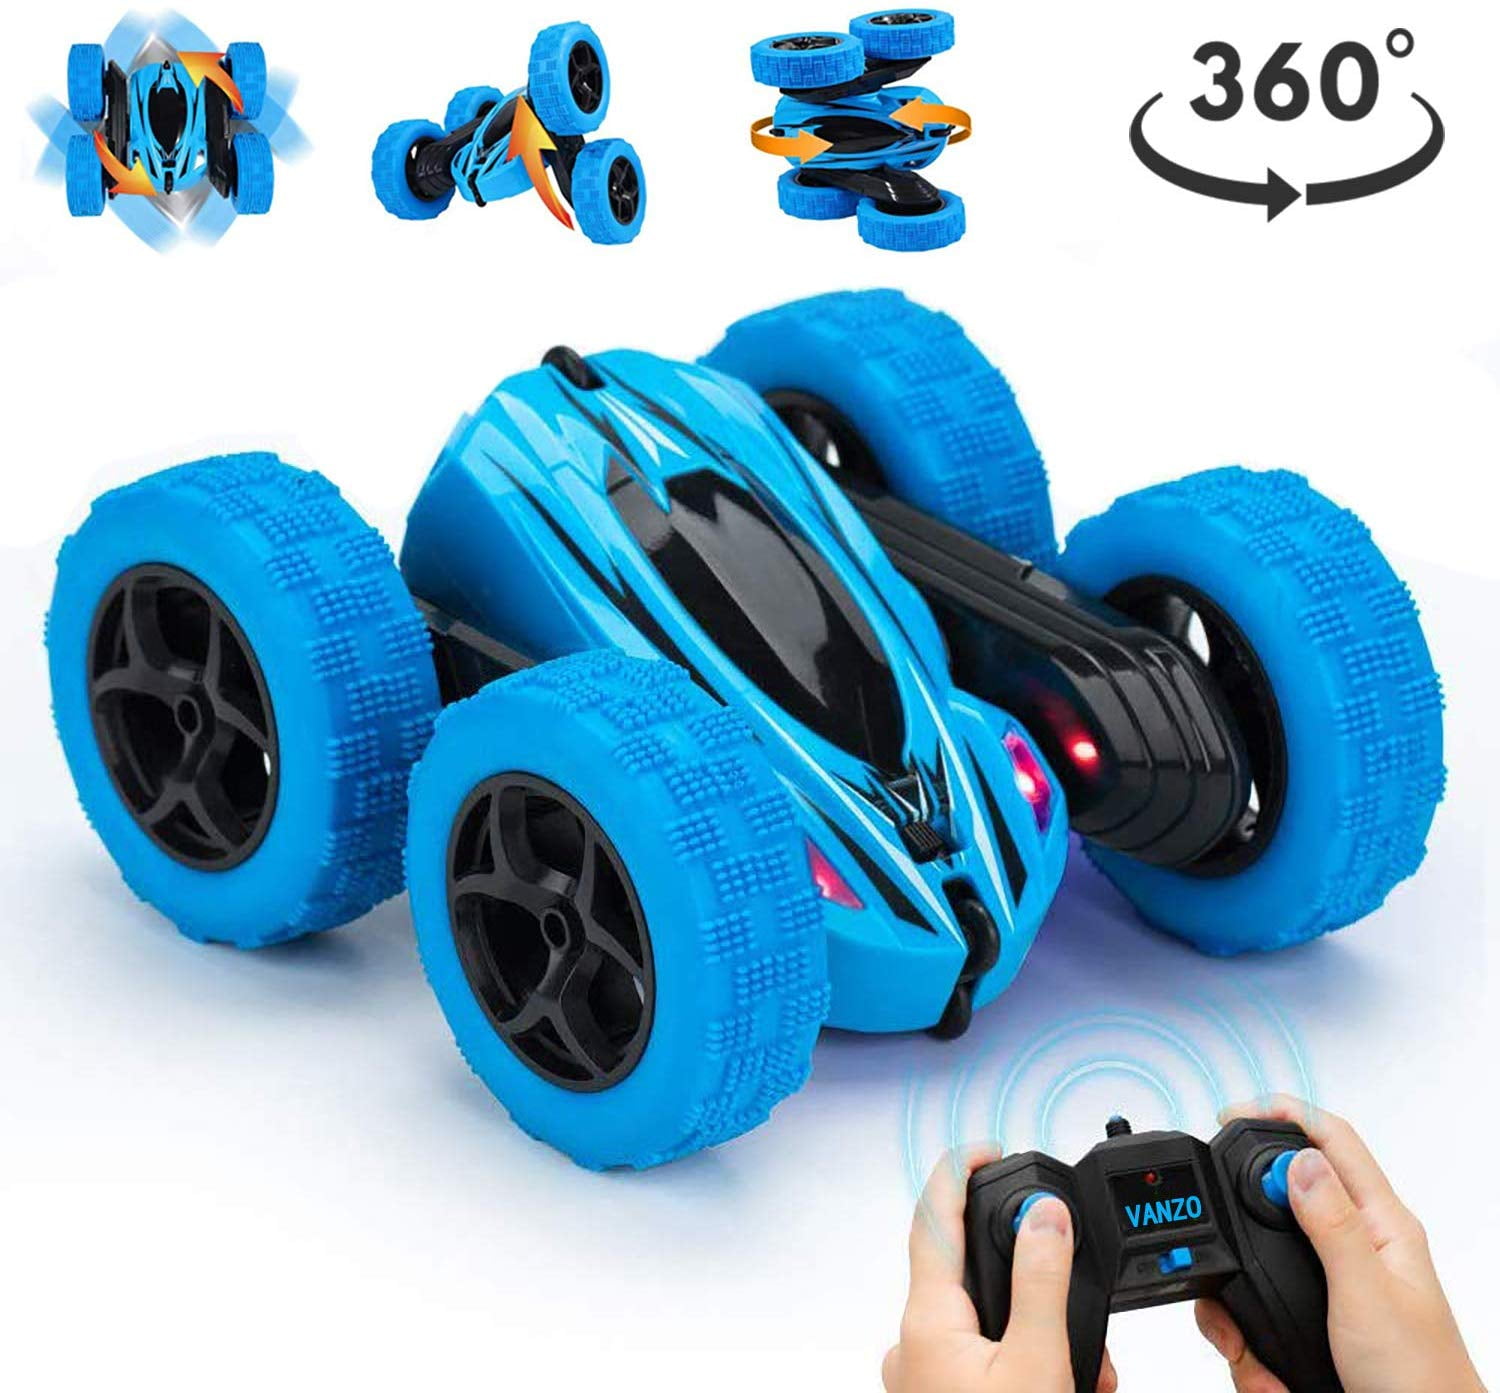 Unique Two-wheeled Sports Stunt 360 Spin Remote Control Car With Lights & Sound. 